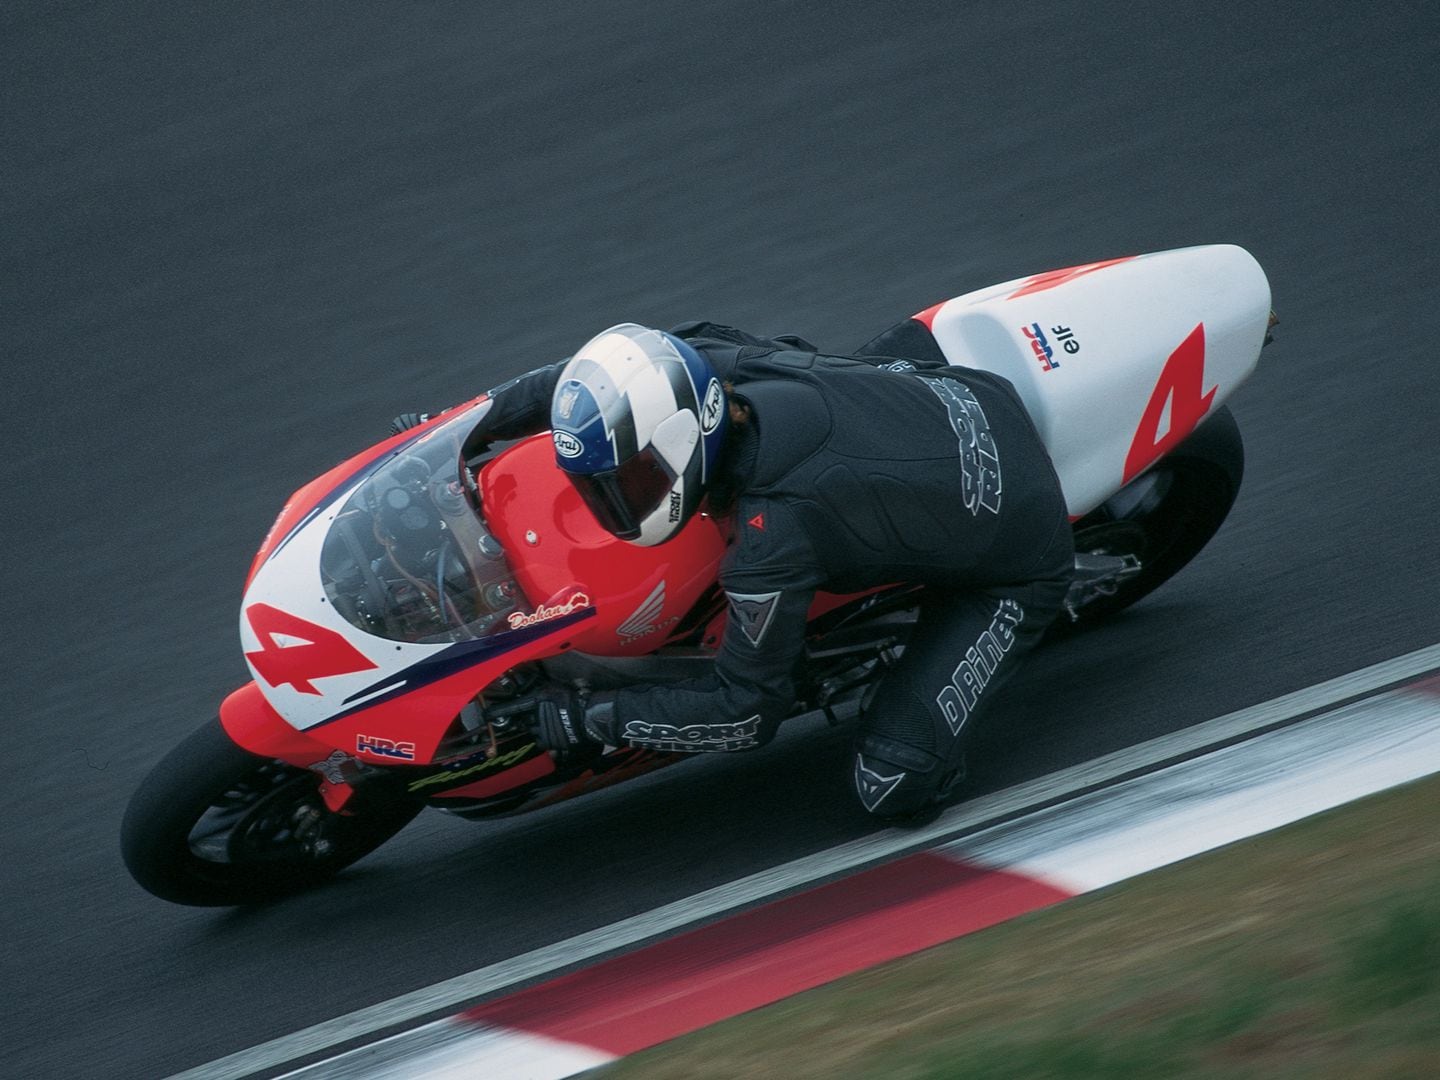 The Lineage of Honda's Grand Prix Motorcycles - Asphalt & Rubber